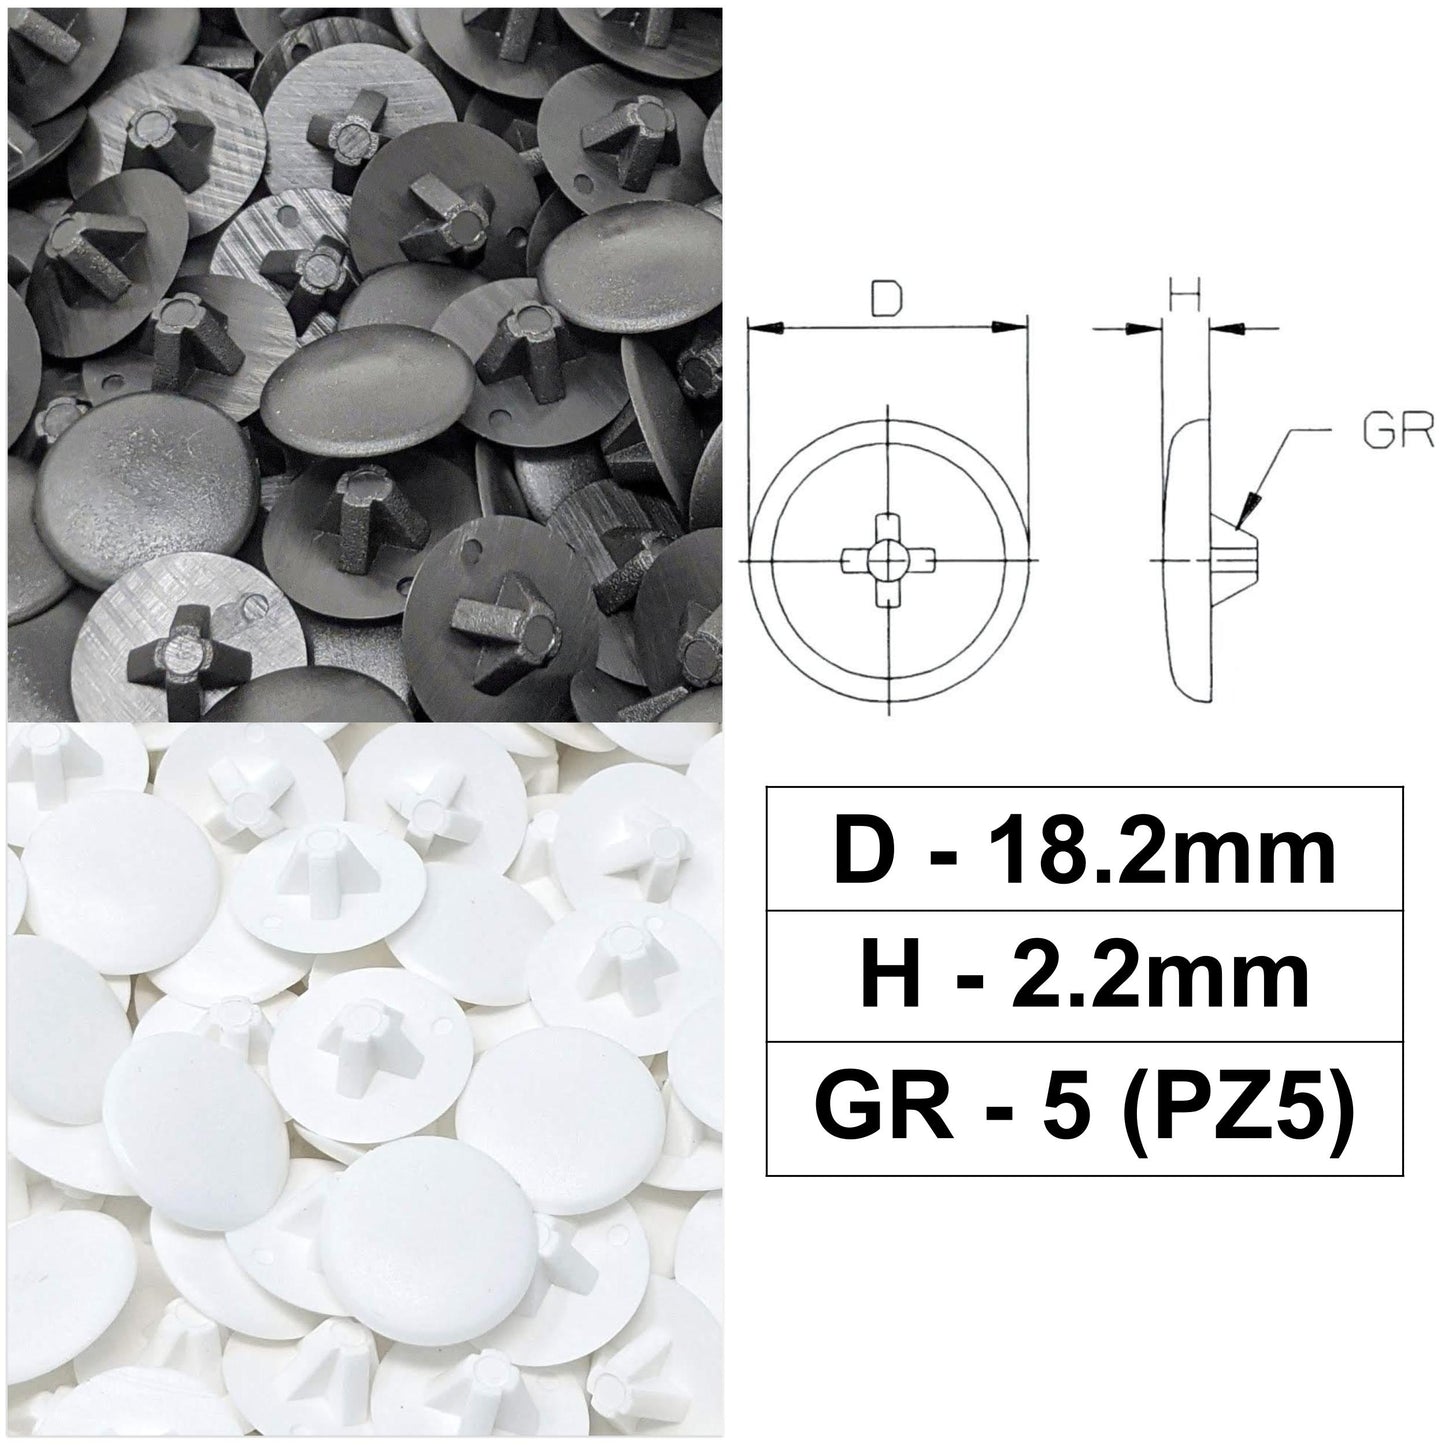 PZ5 Pozi Screw Caps Covers (18.2mm x 2.2mm) | Made in Germany | Keay Vital Parts